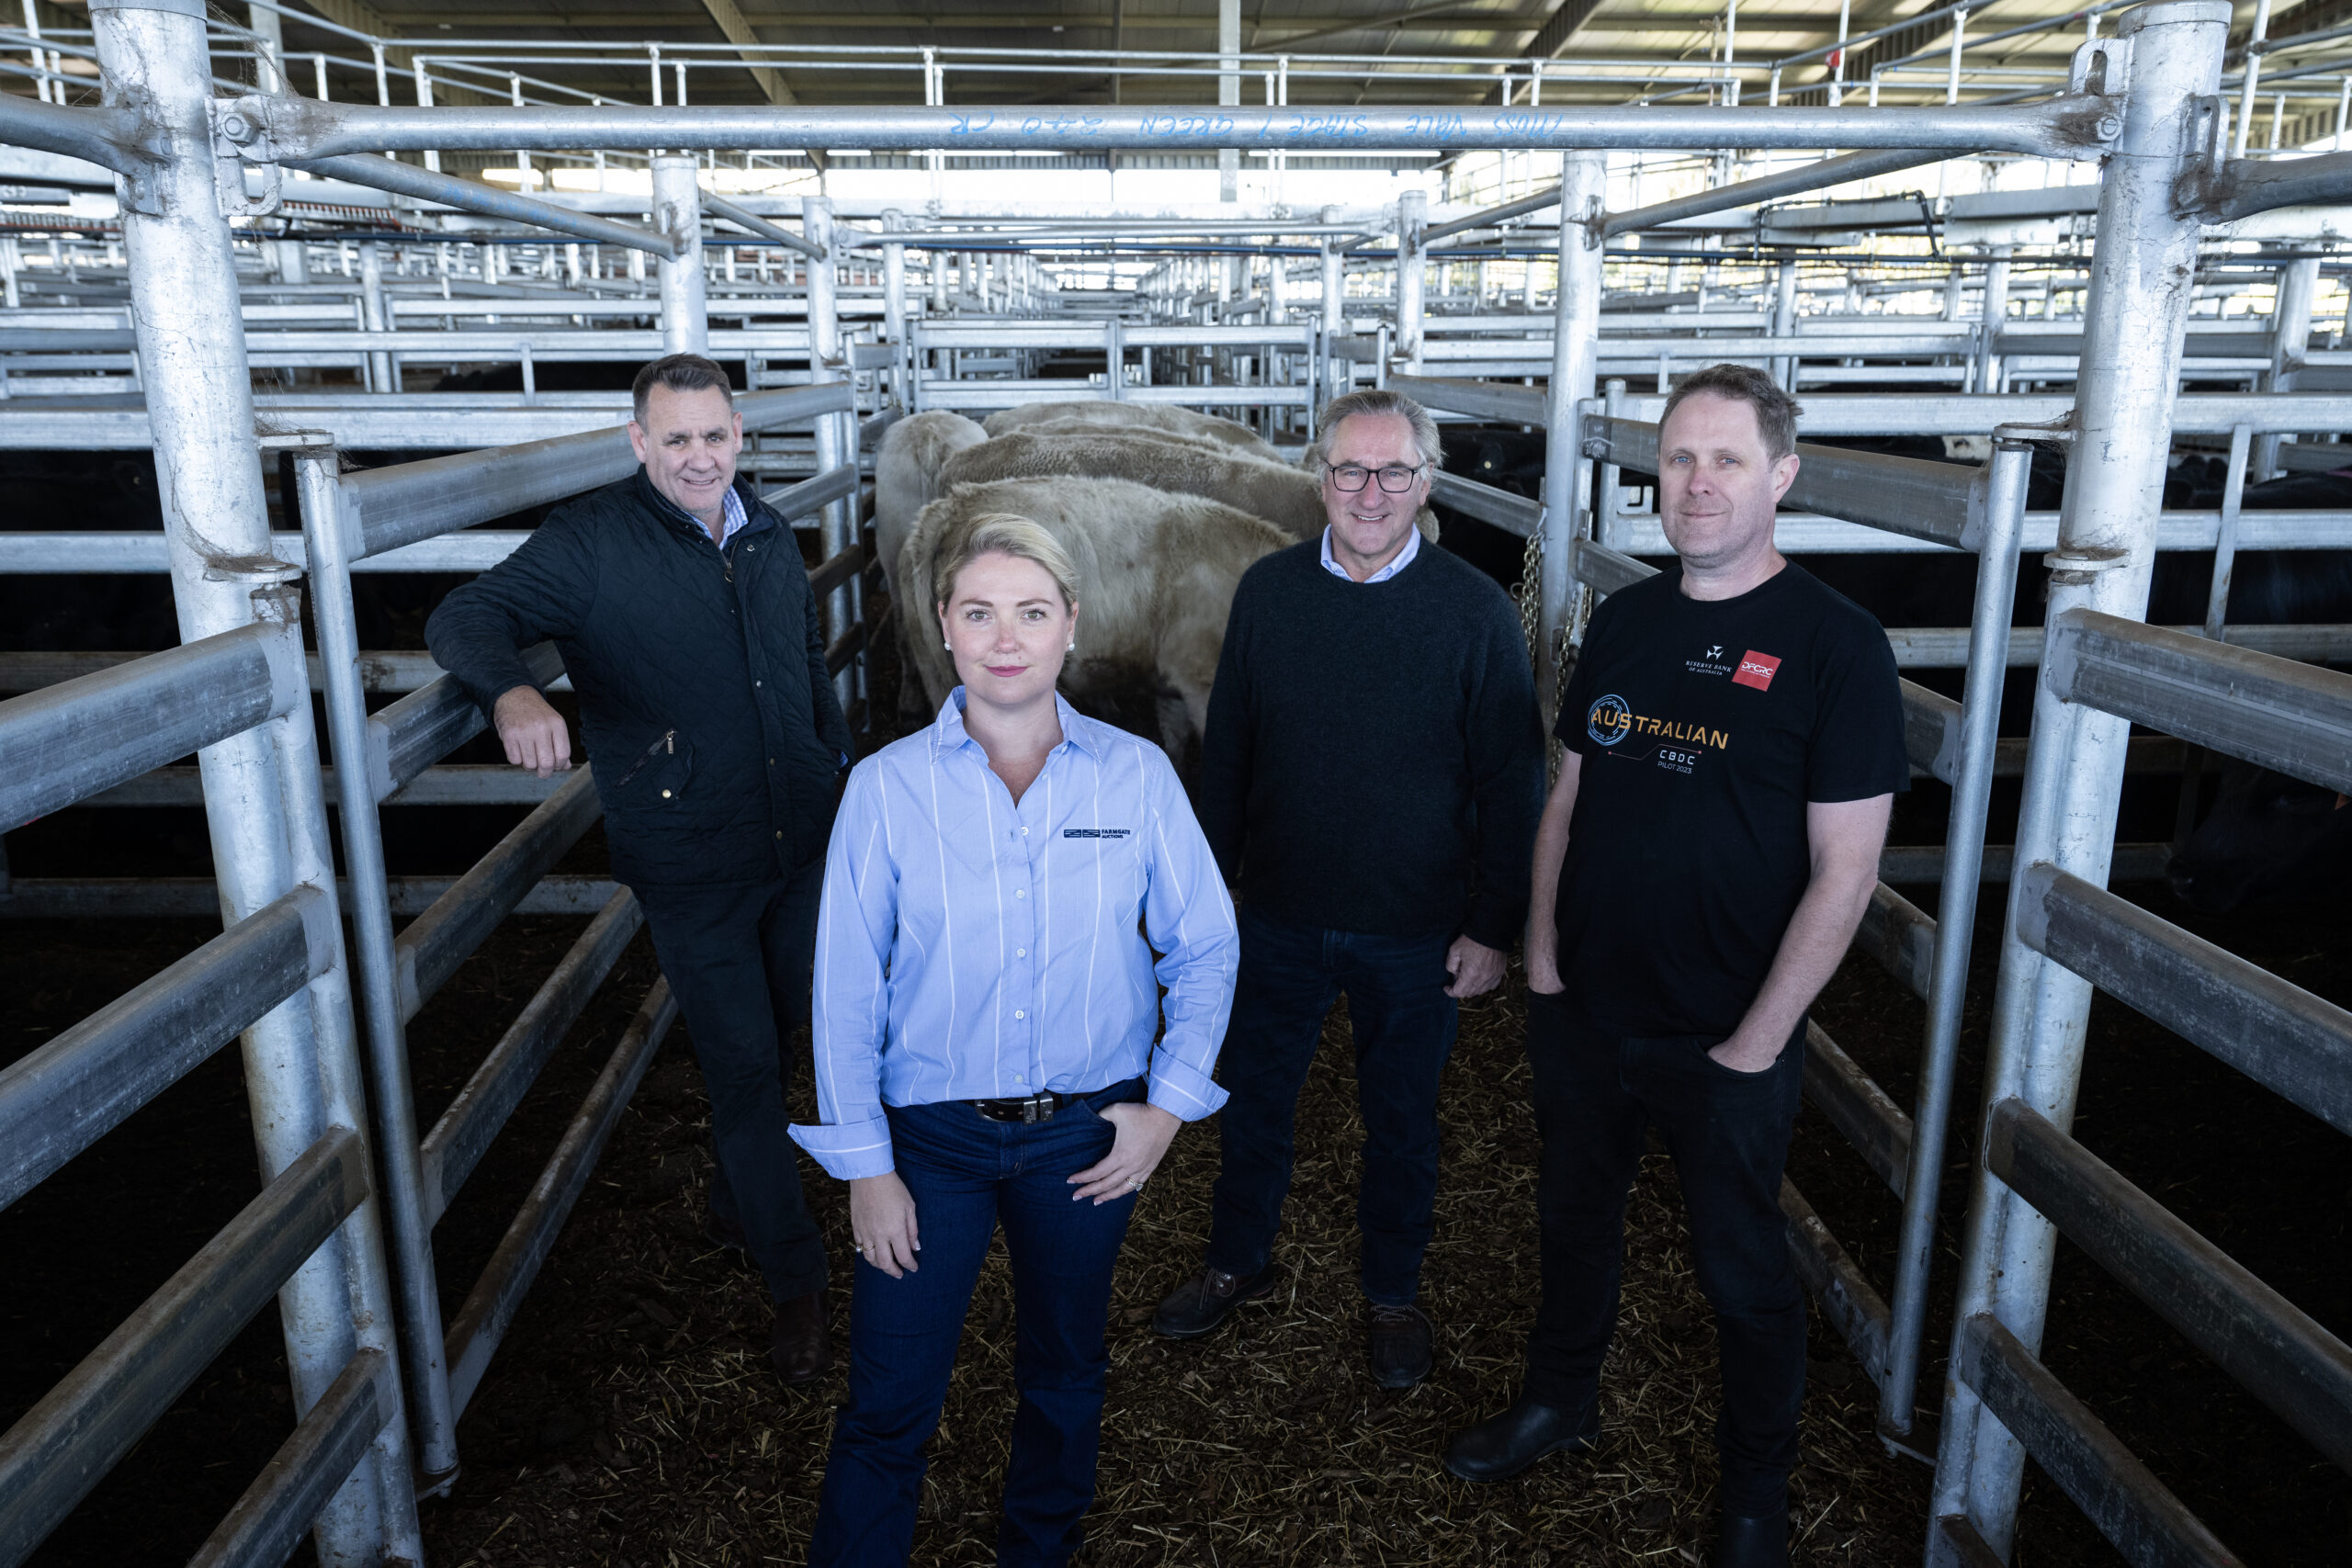 Farmgate AFR feature: Digital currency used in landmark cattle sale for rural economy